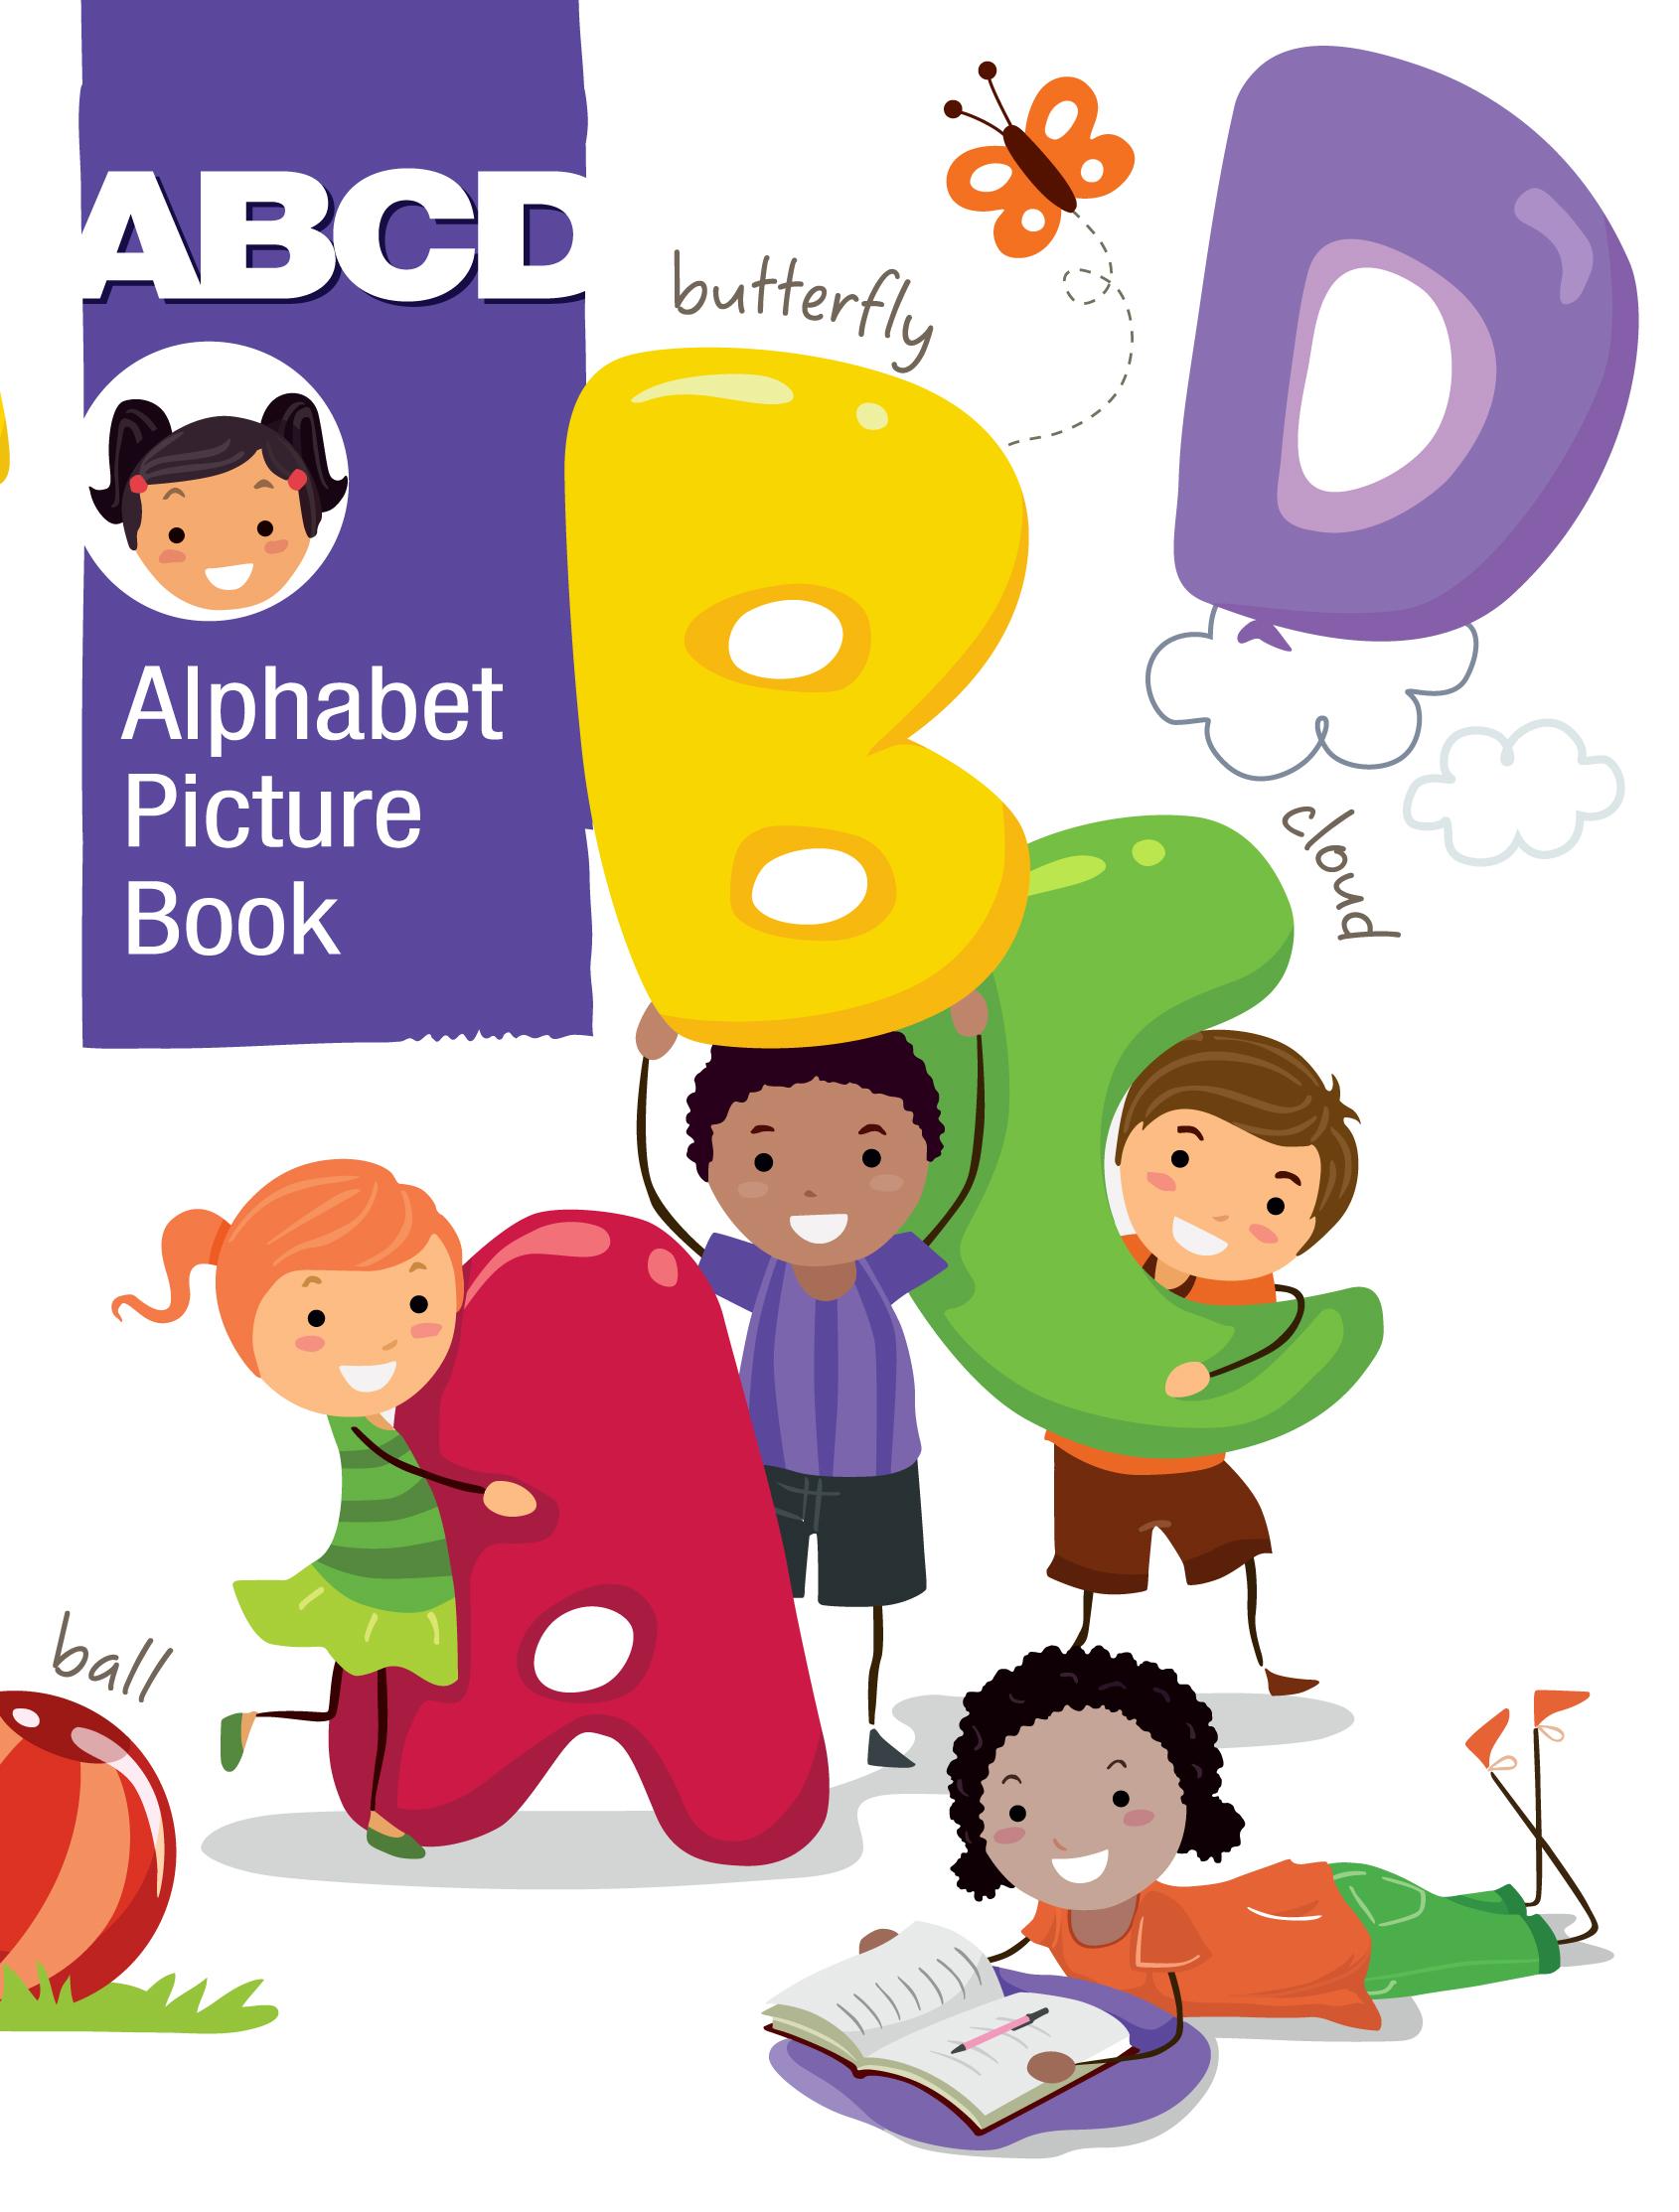 ABCD – Alphabet Picture Book